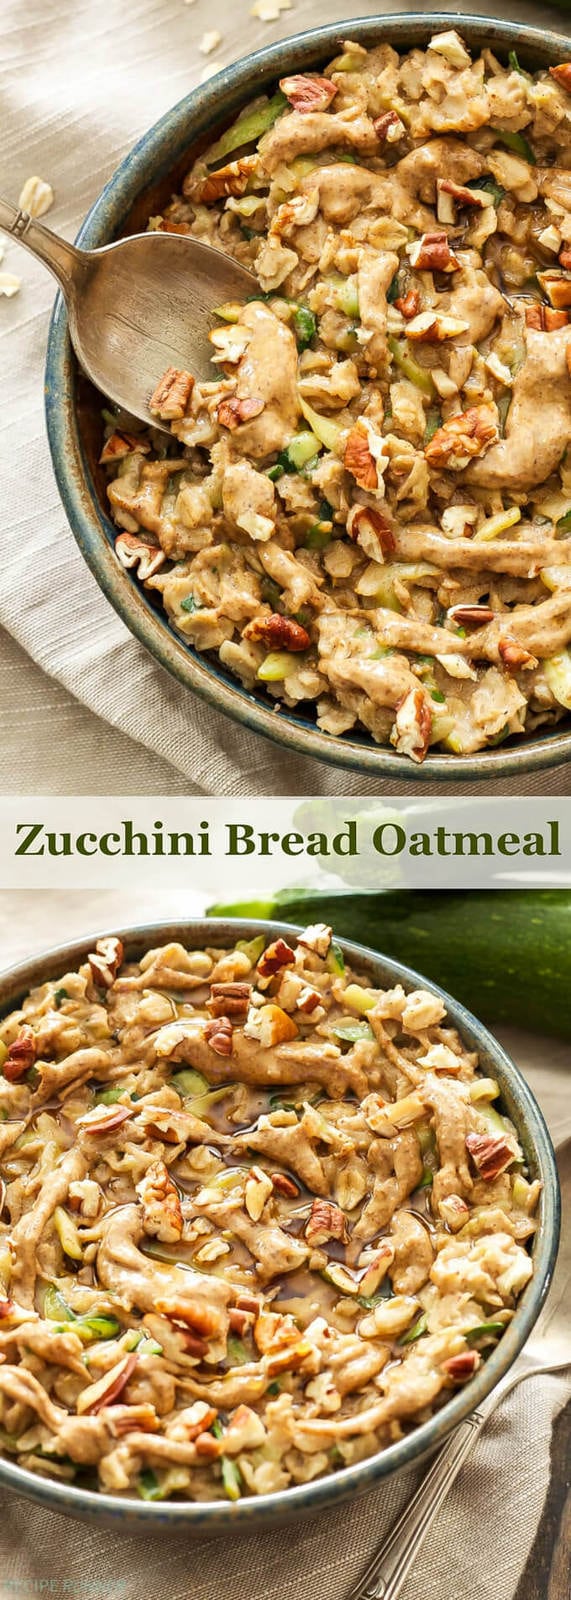 Zucchini Bread Oatmeal | Treat yourself to a bowl of this Zucchini Bread Oatmeal and get all the flavors that you would from the bread without overindulging!